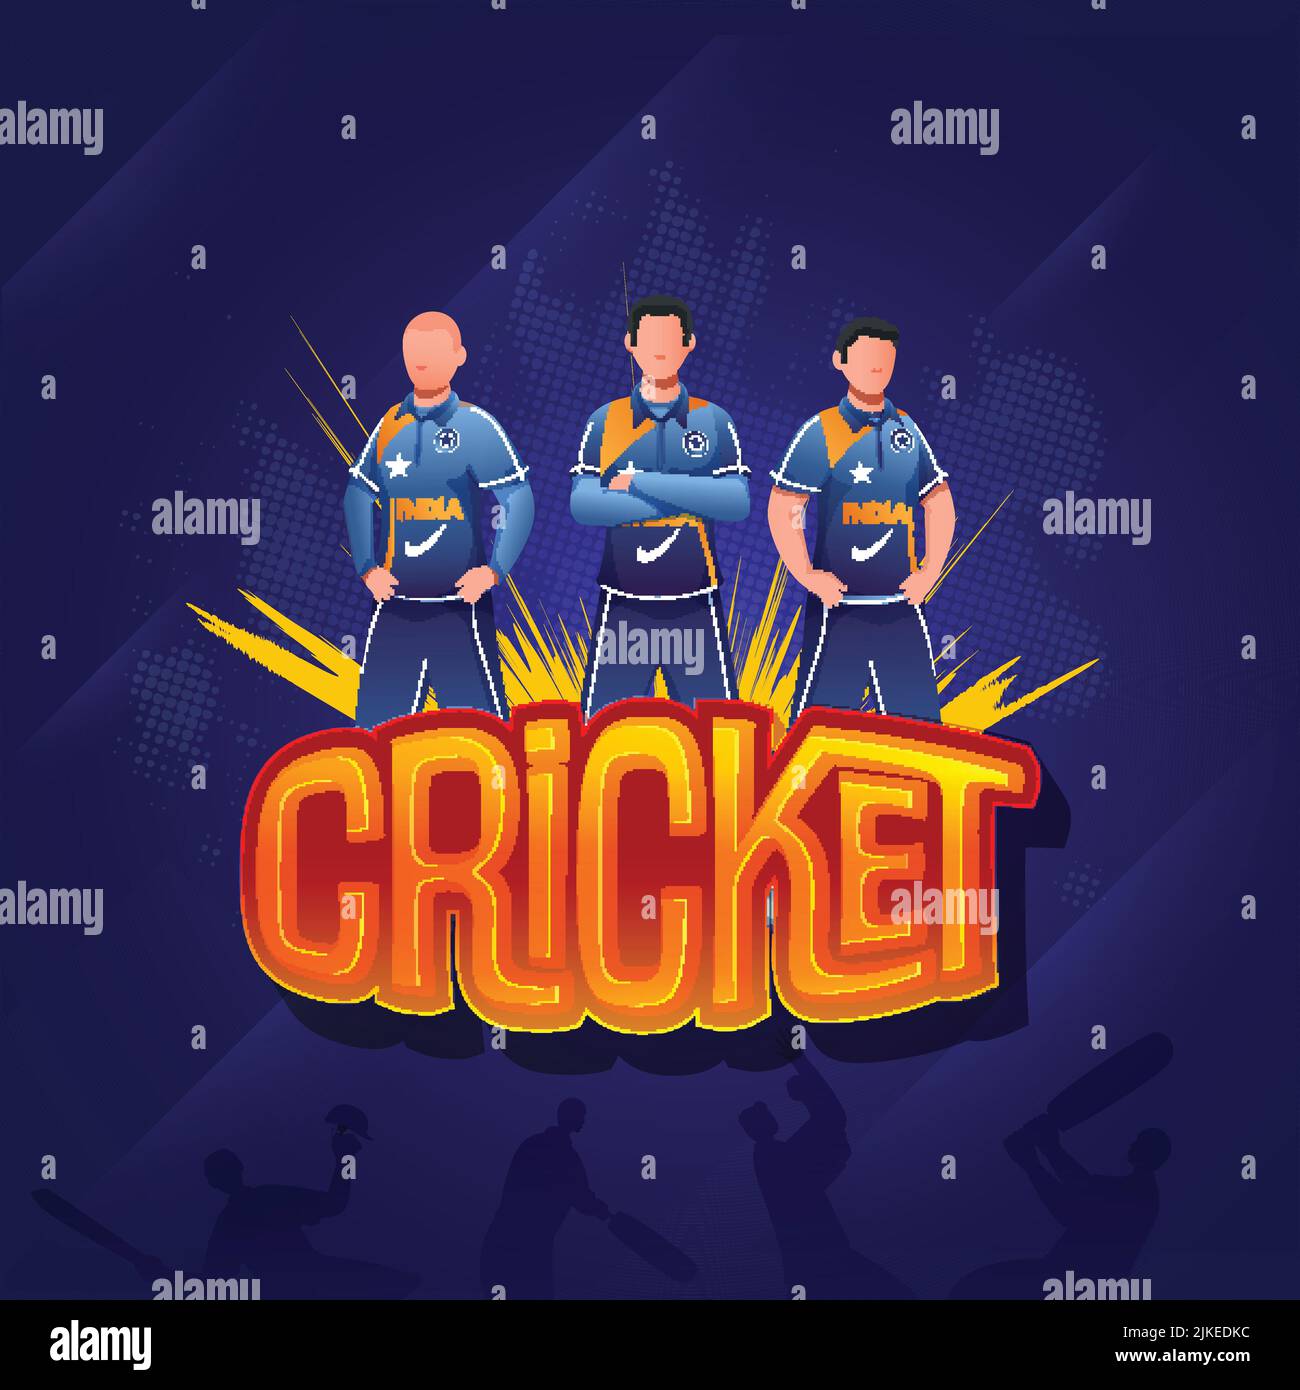 Sticker Style Cricket Font With Faceless India Cricketer Players On Blue Halftone Effect Background. Stock Vector